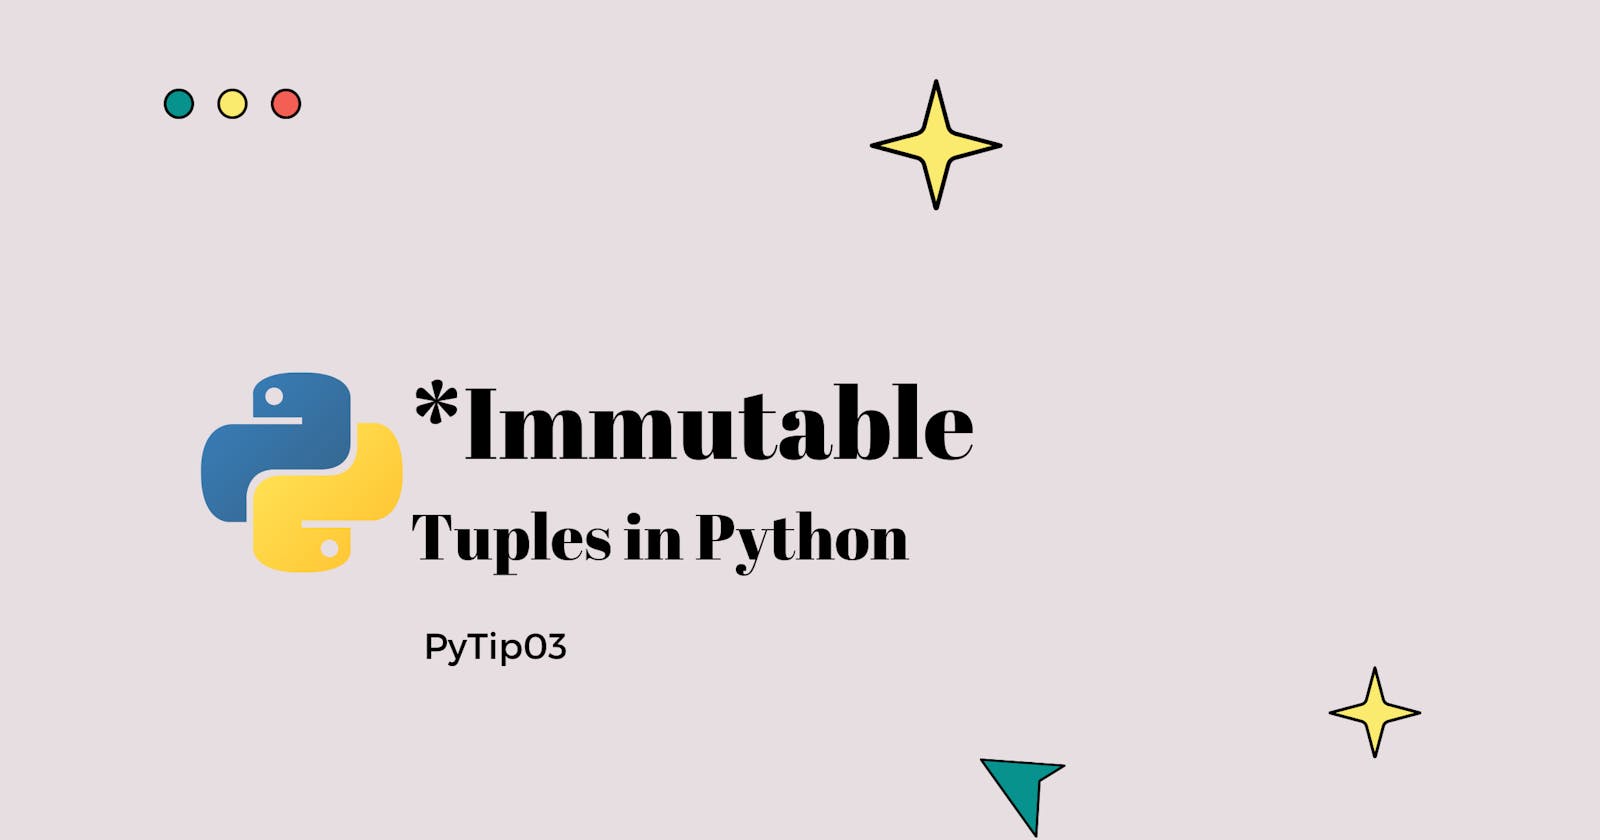 Are Tuples really immutable? #PyTip03